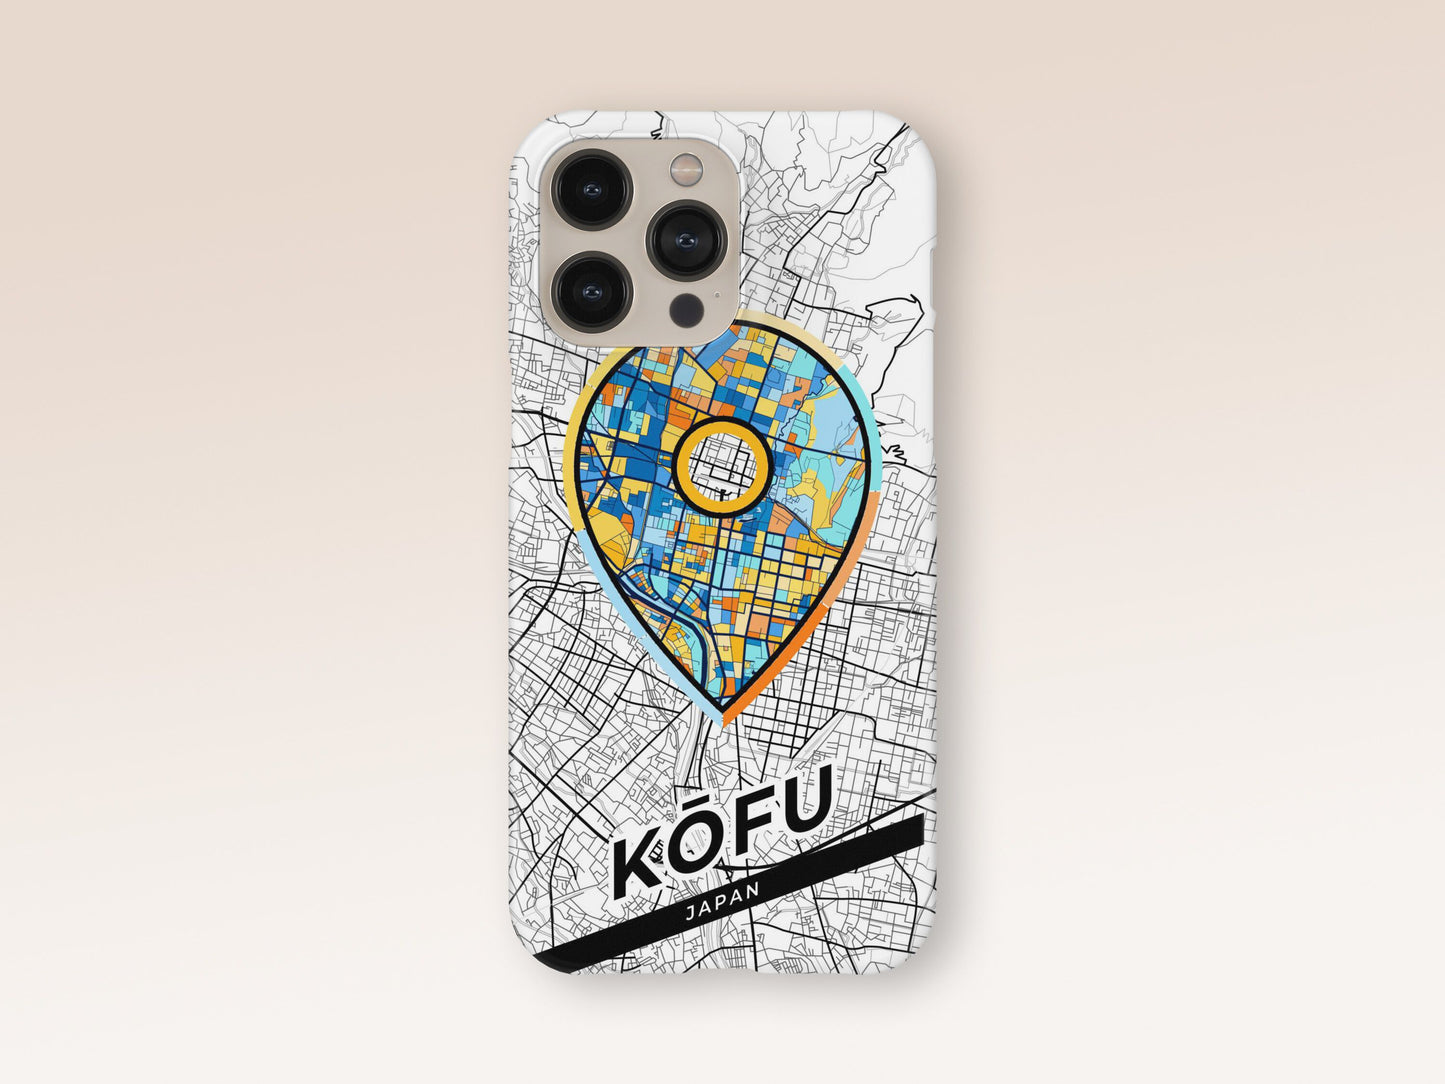 Kōfu Japan slim phone case with colorful icon. Birthday, wedding or housewarming gift. Couple match cases. 1